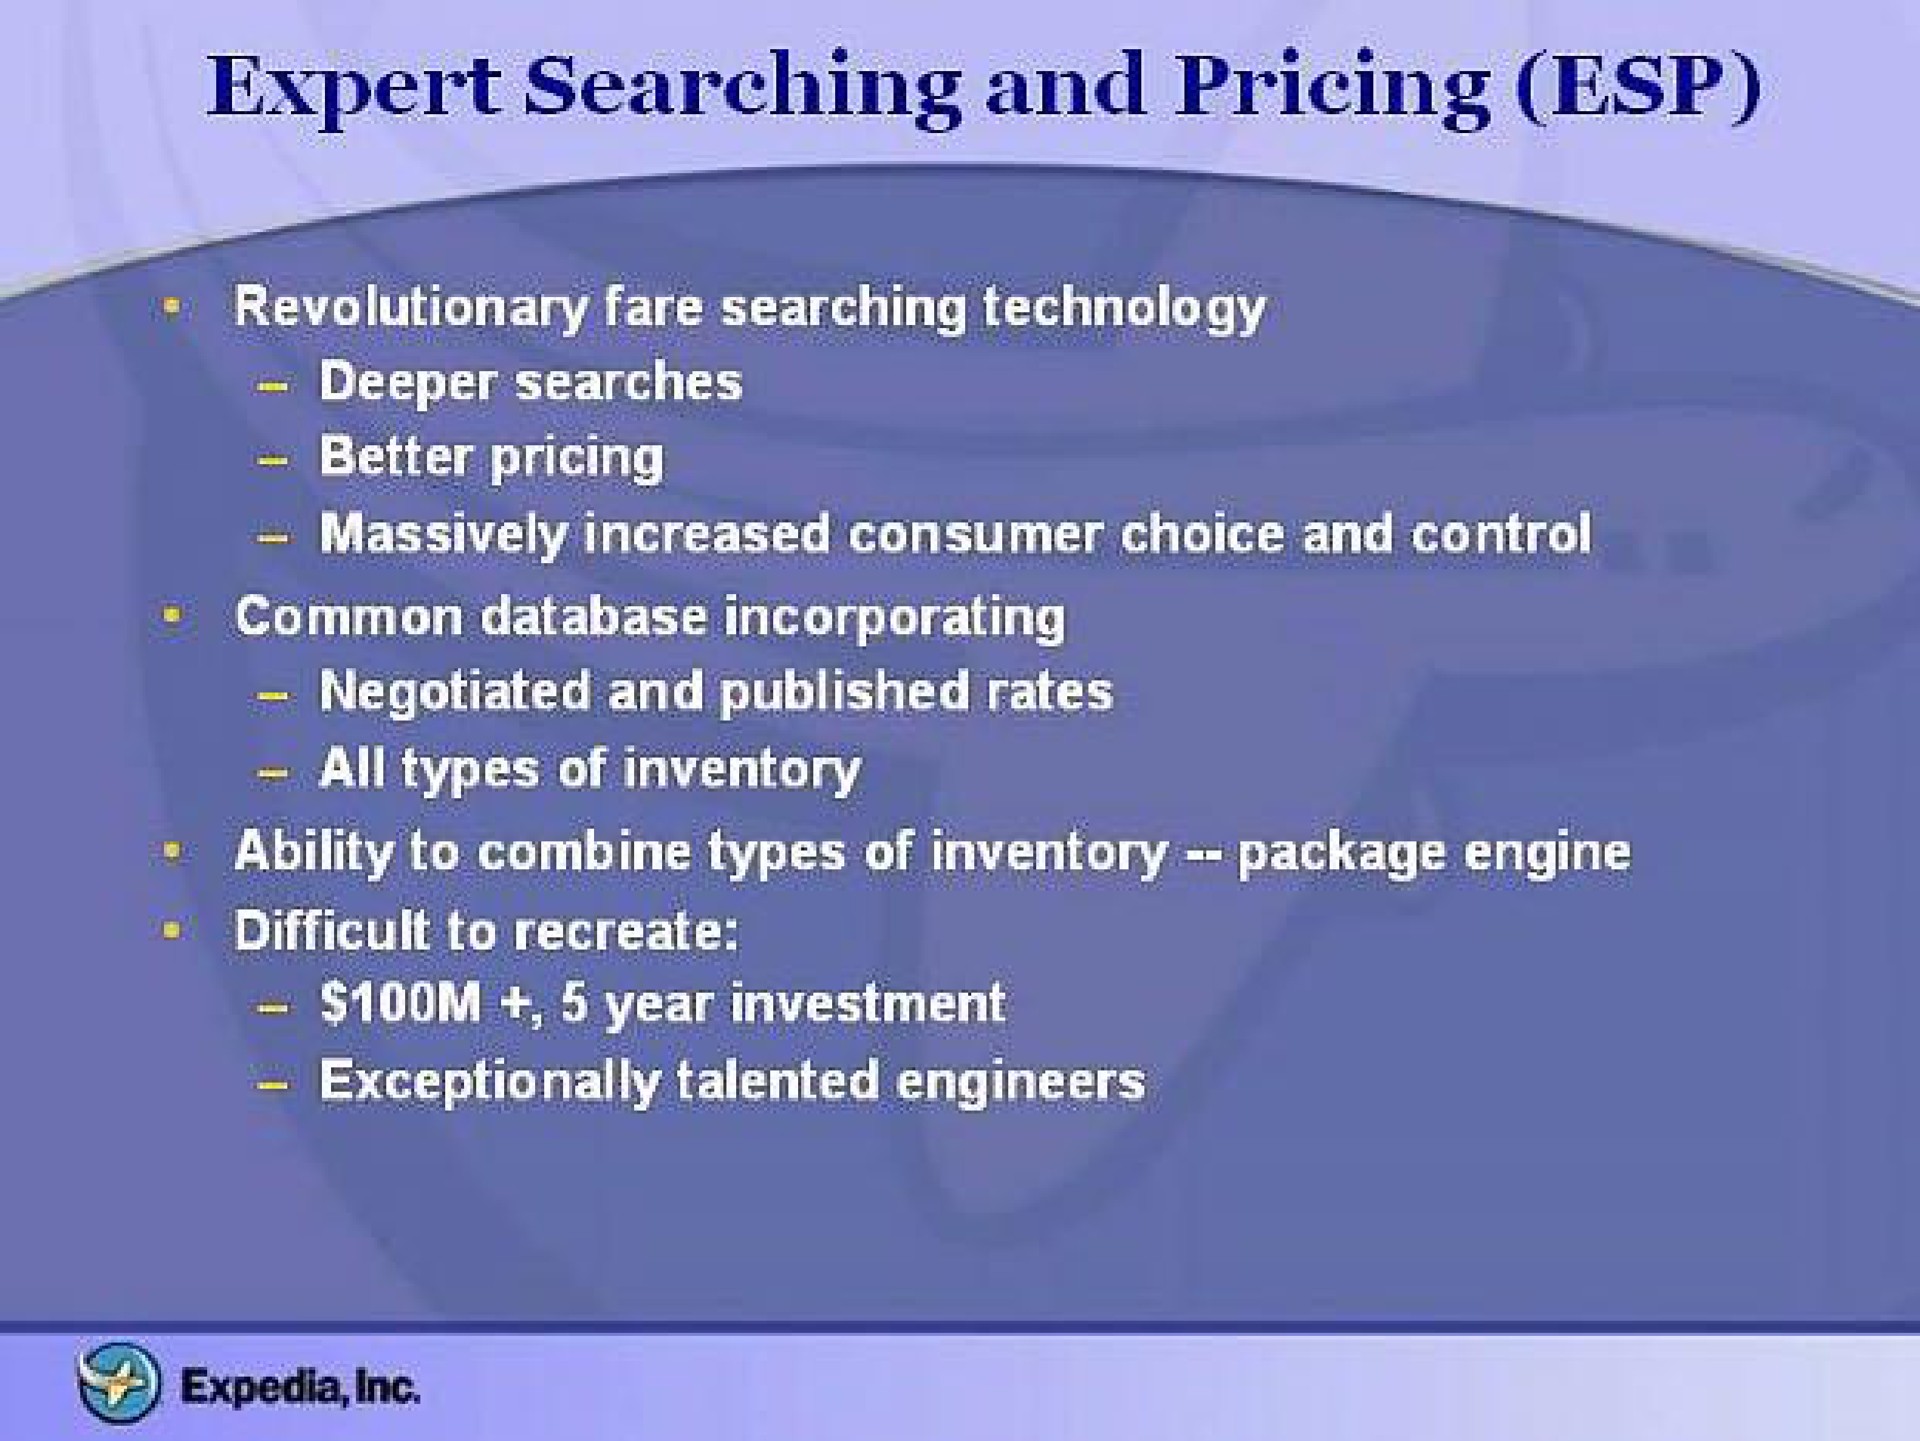 expert searching and pricing sey heed | Expedia